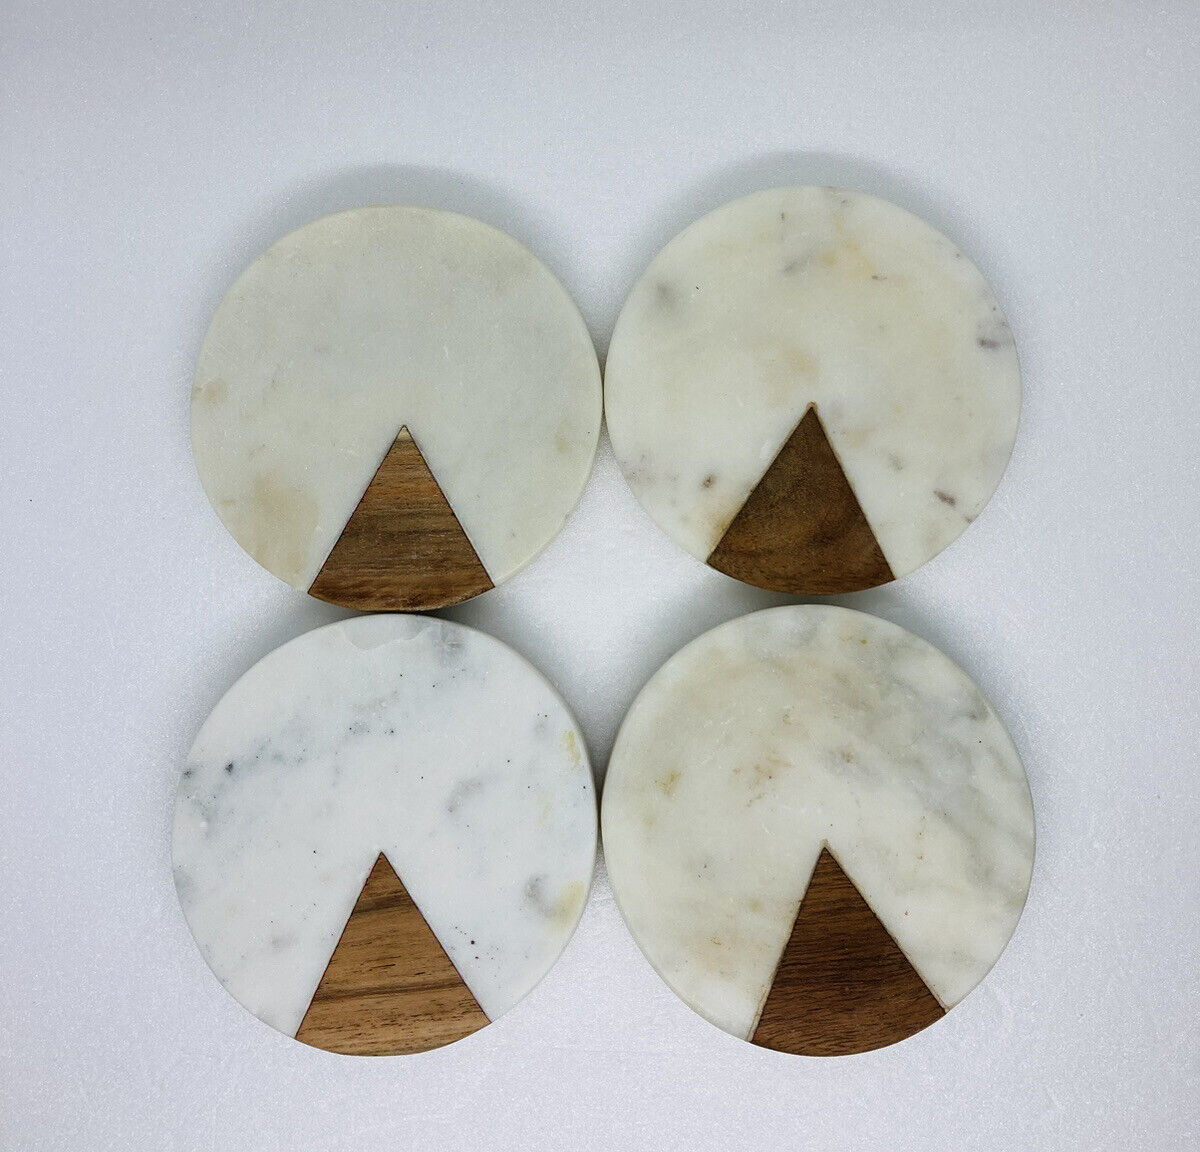 Vintage 1970s Marble Stone And Wood Drinking Coaster Set Of 4 Heavy Duty BB